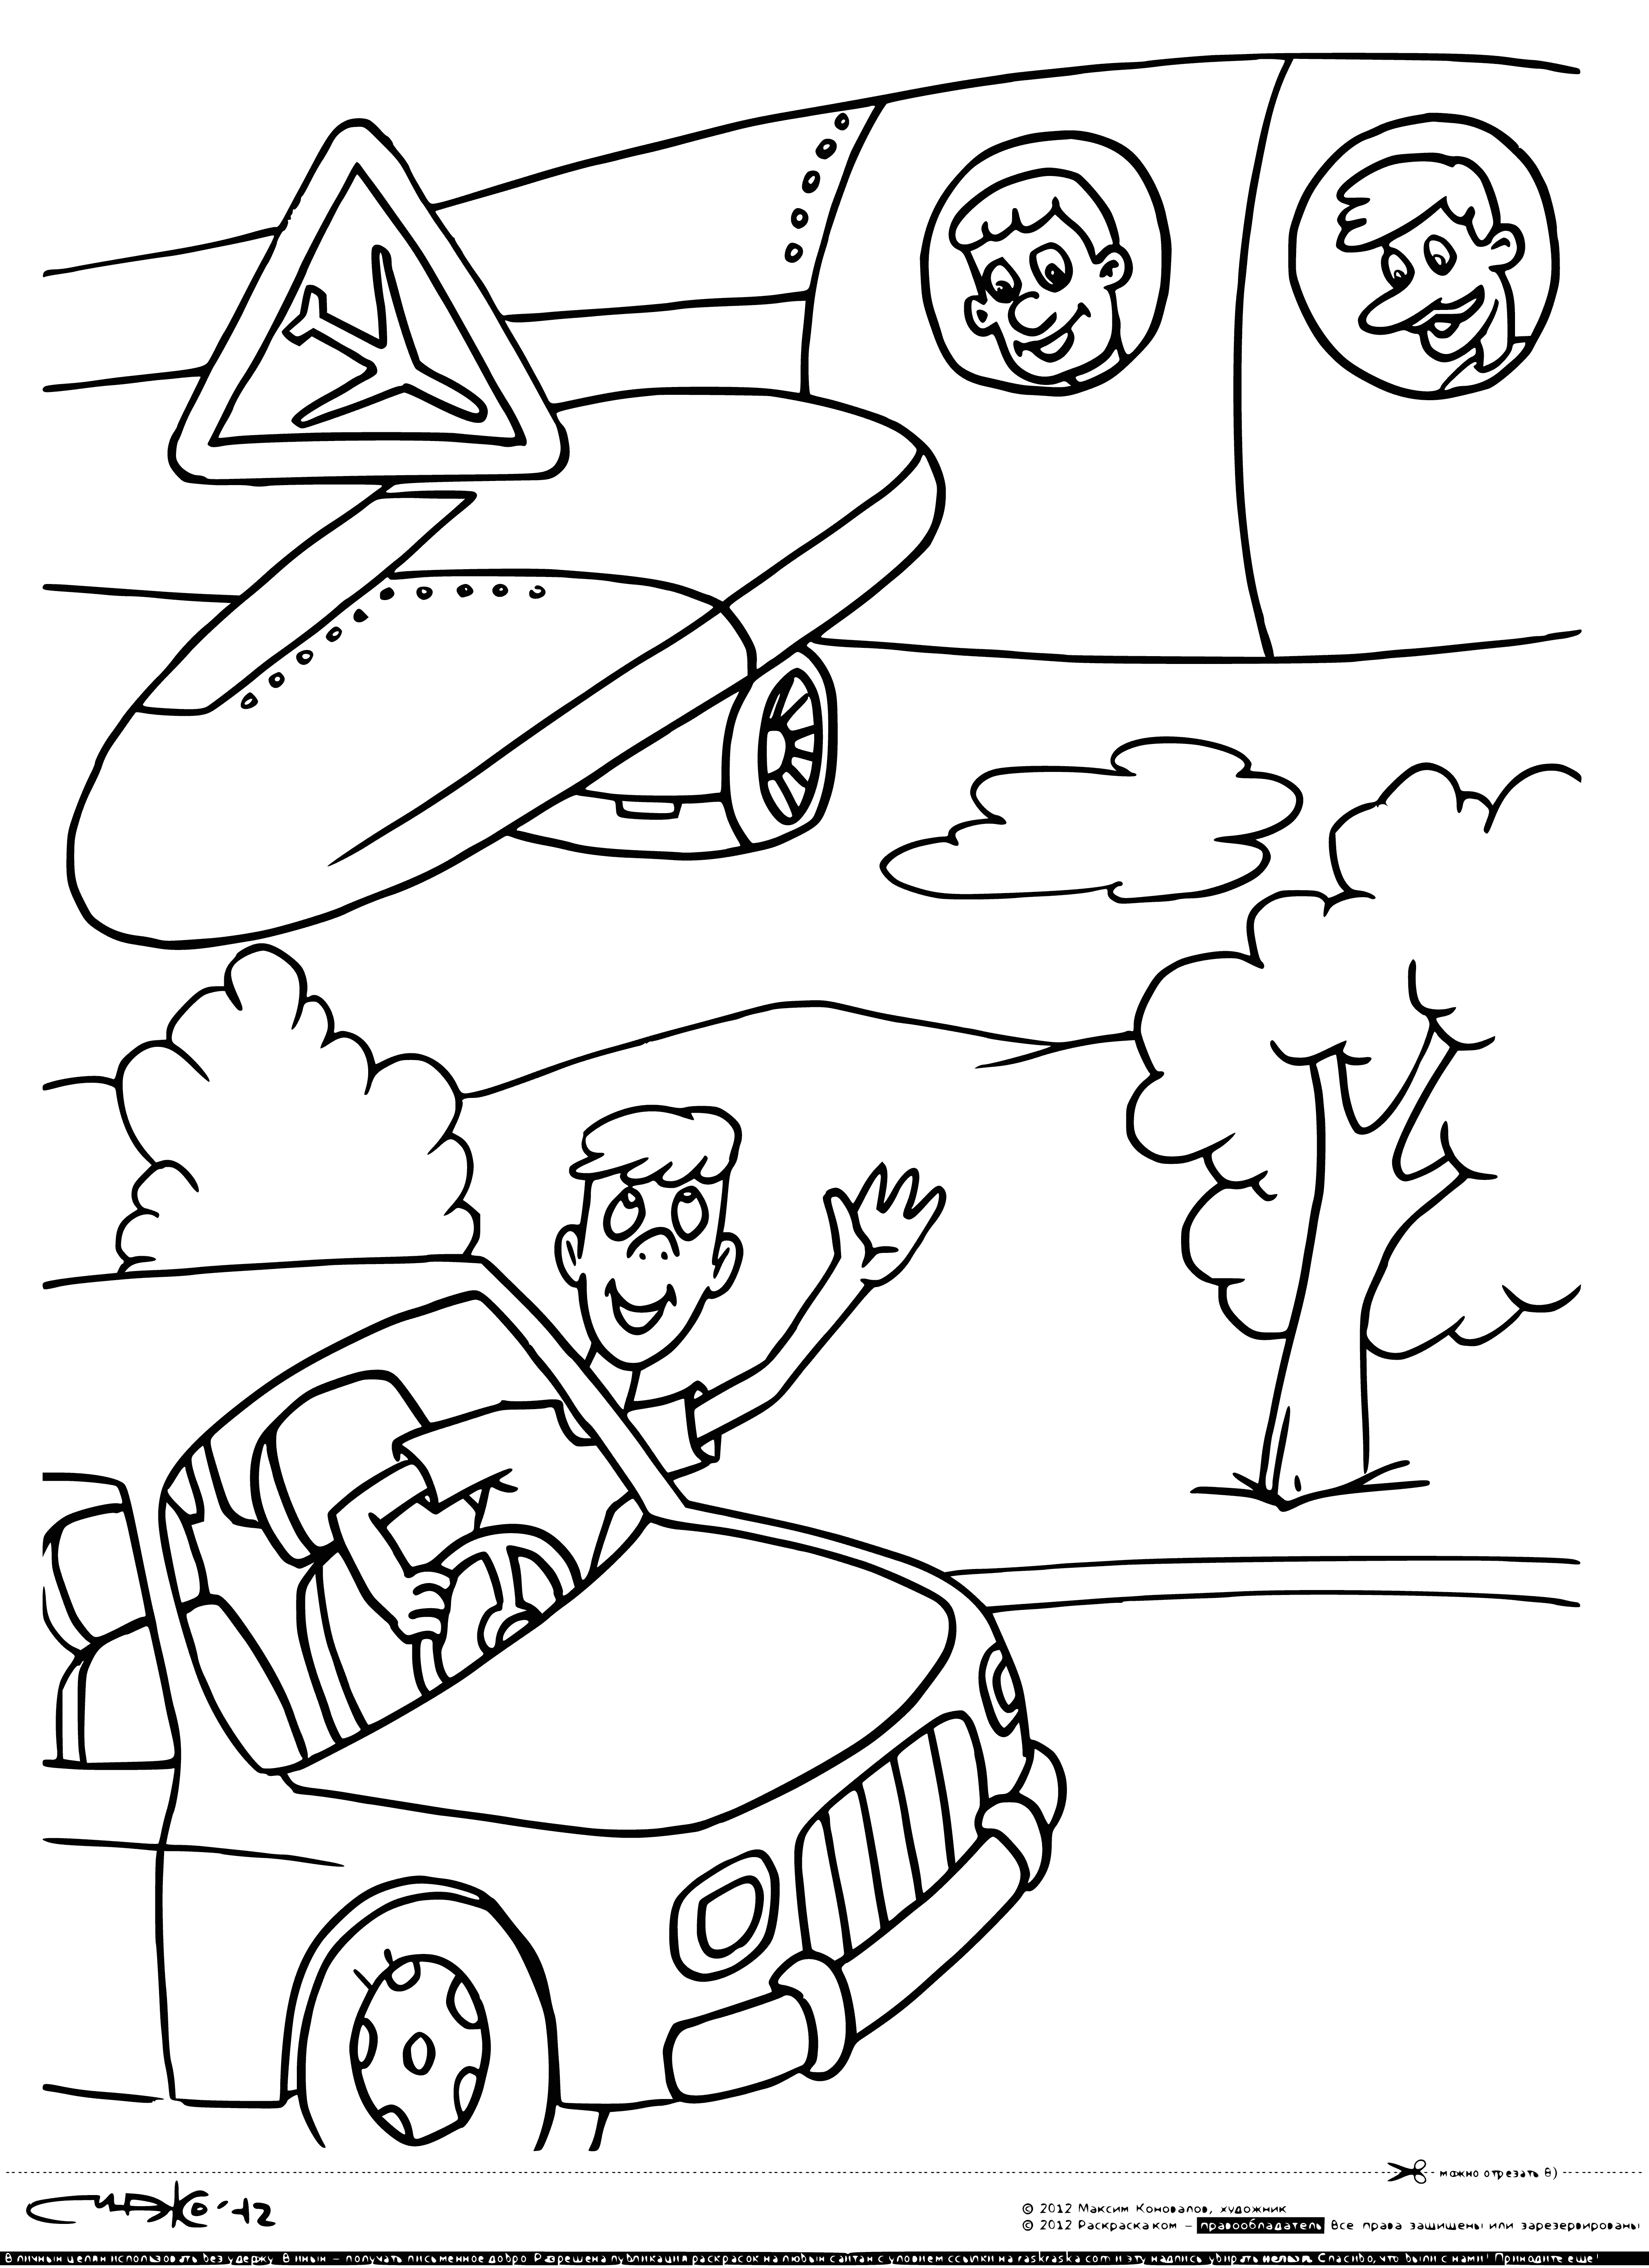 Low-flying aircraft coloring page